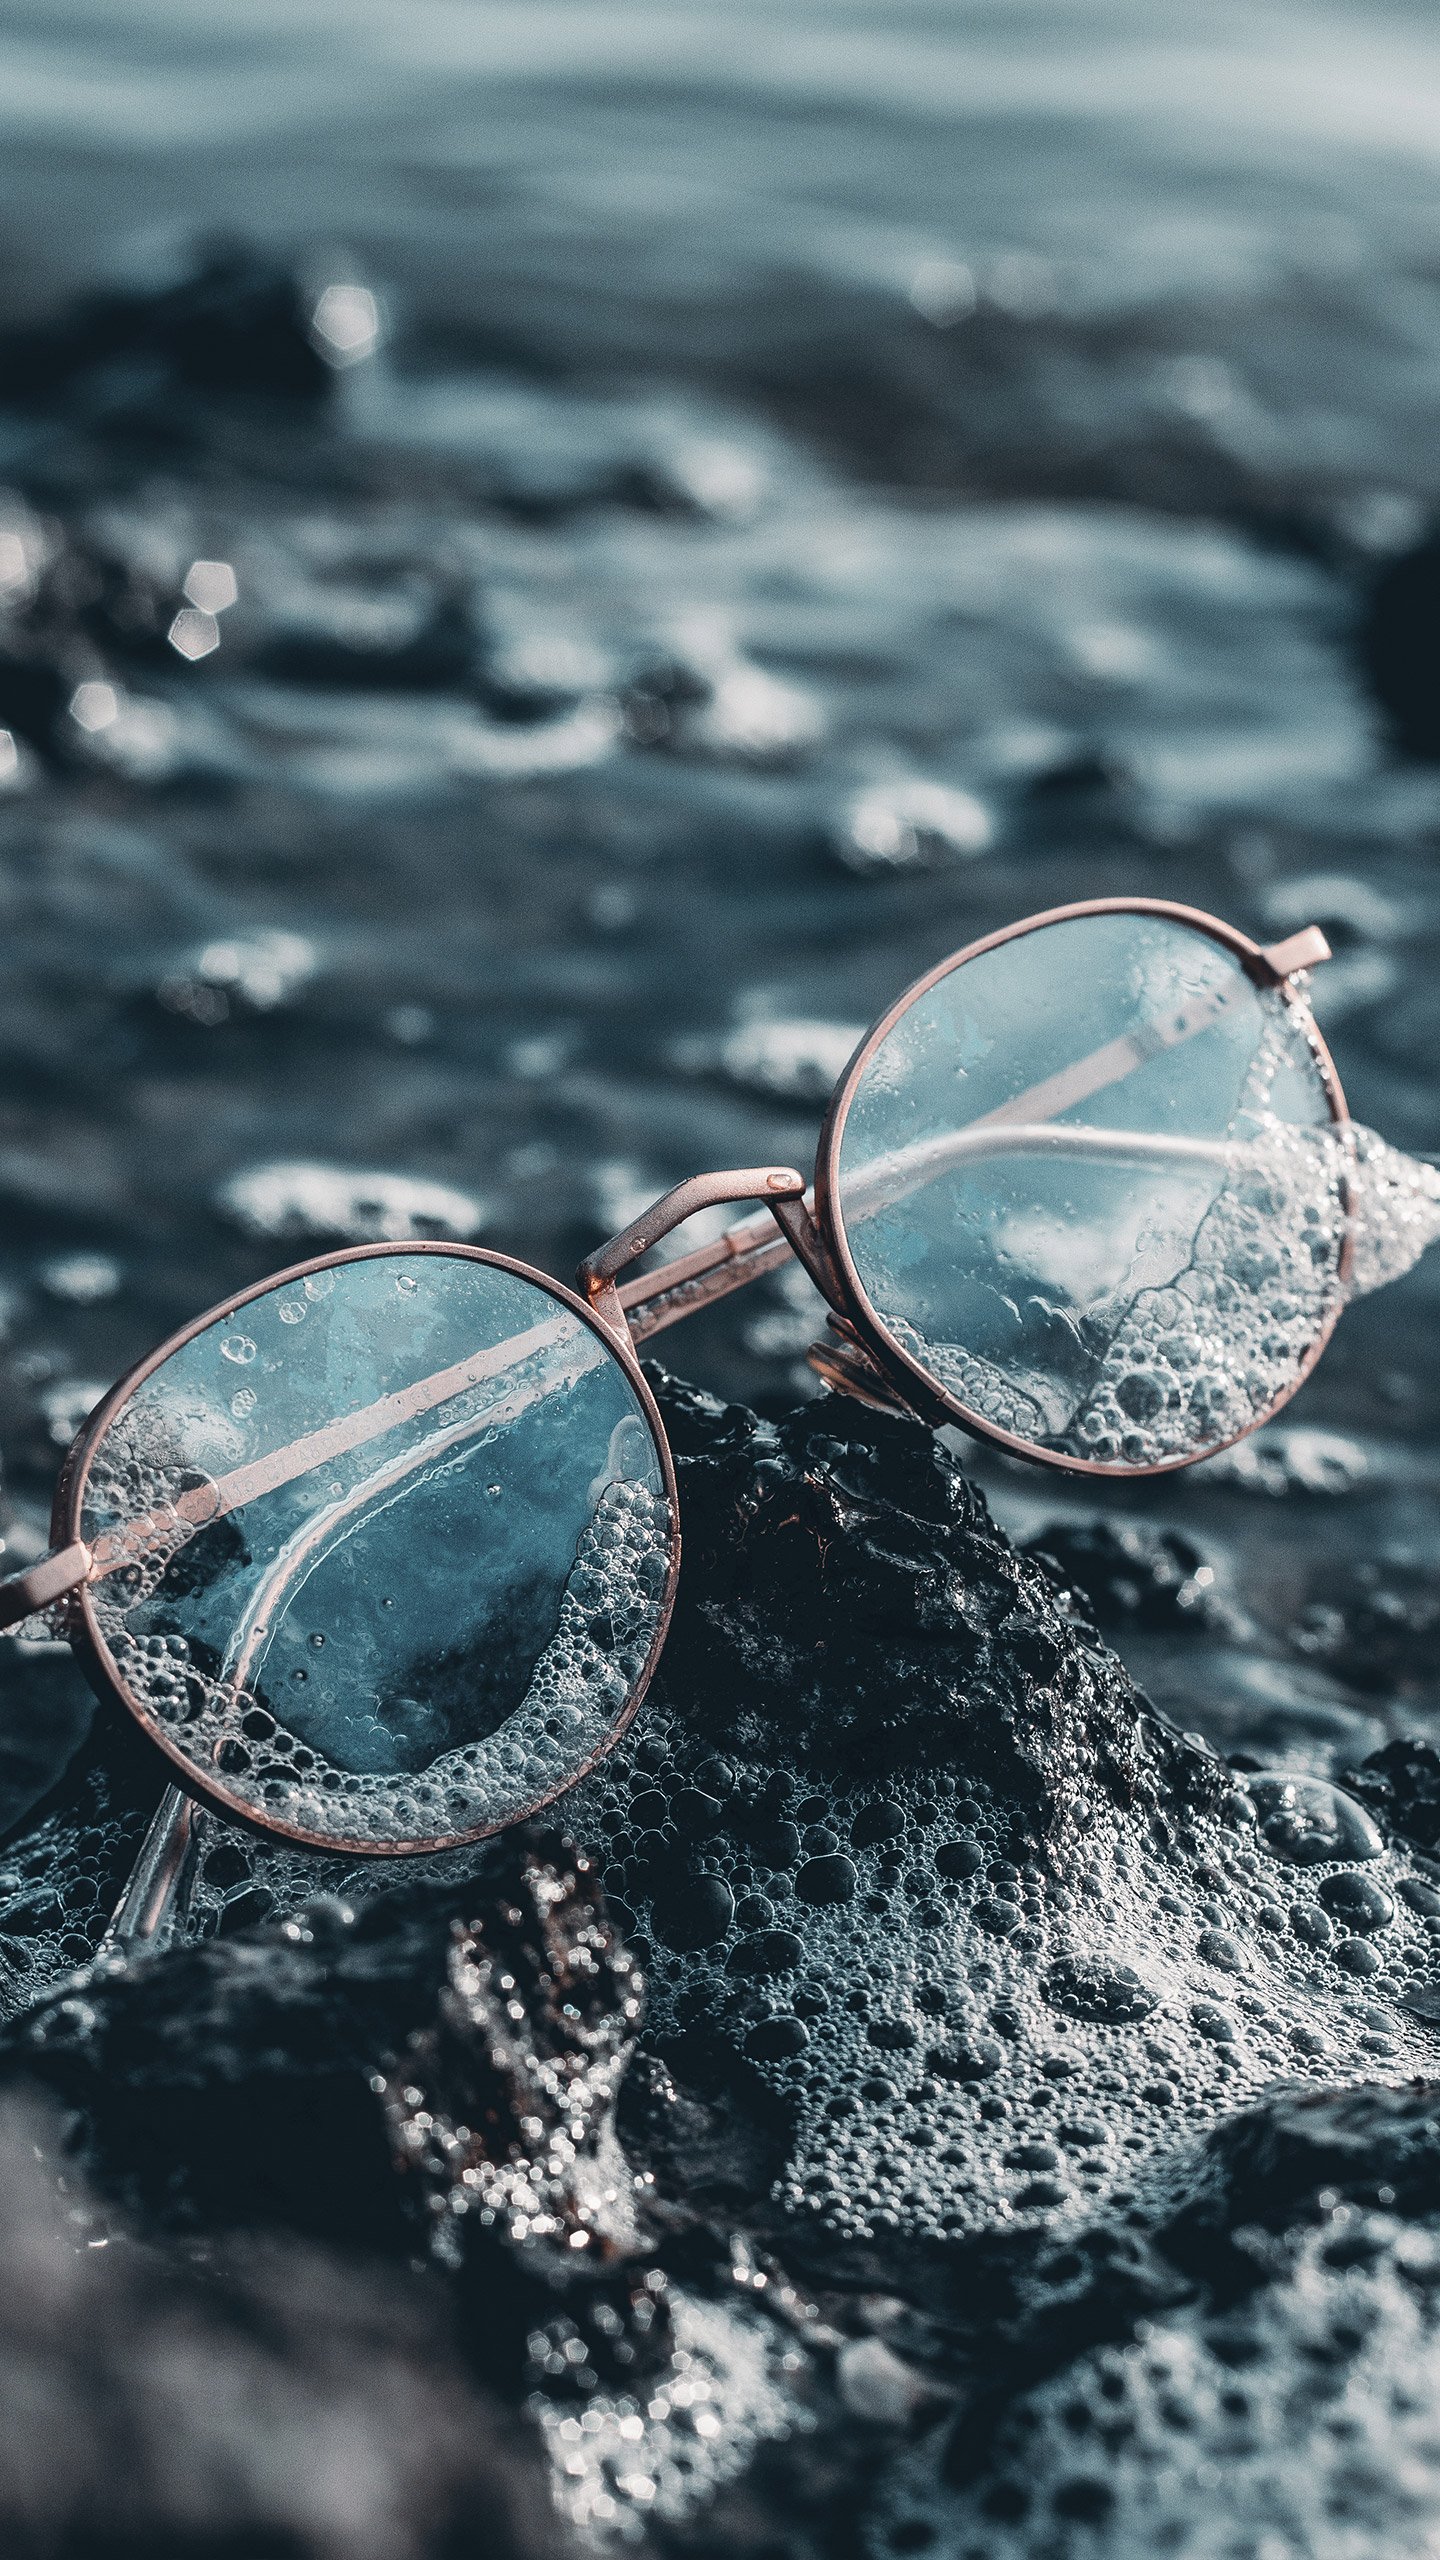 Glasses Mobile Phone Wallpaper Images Free Download on Lovepik | 400569635